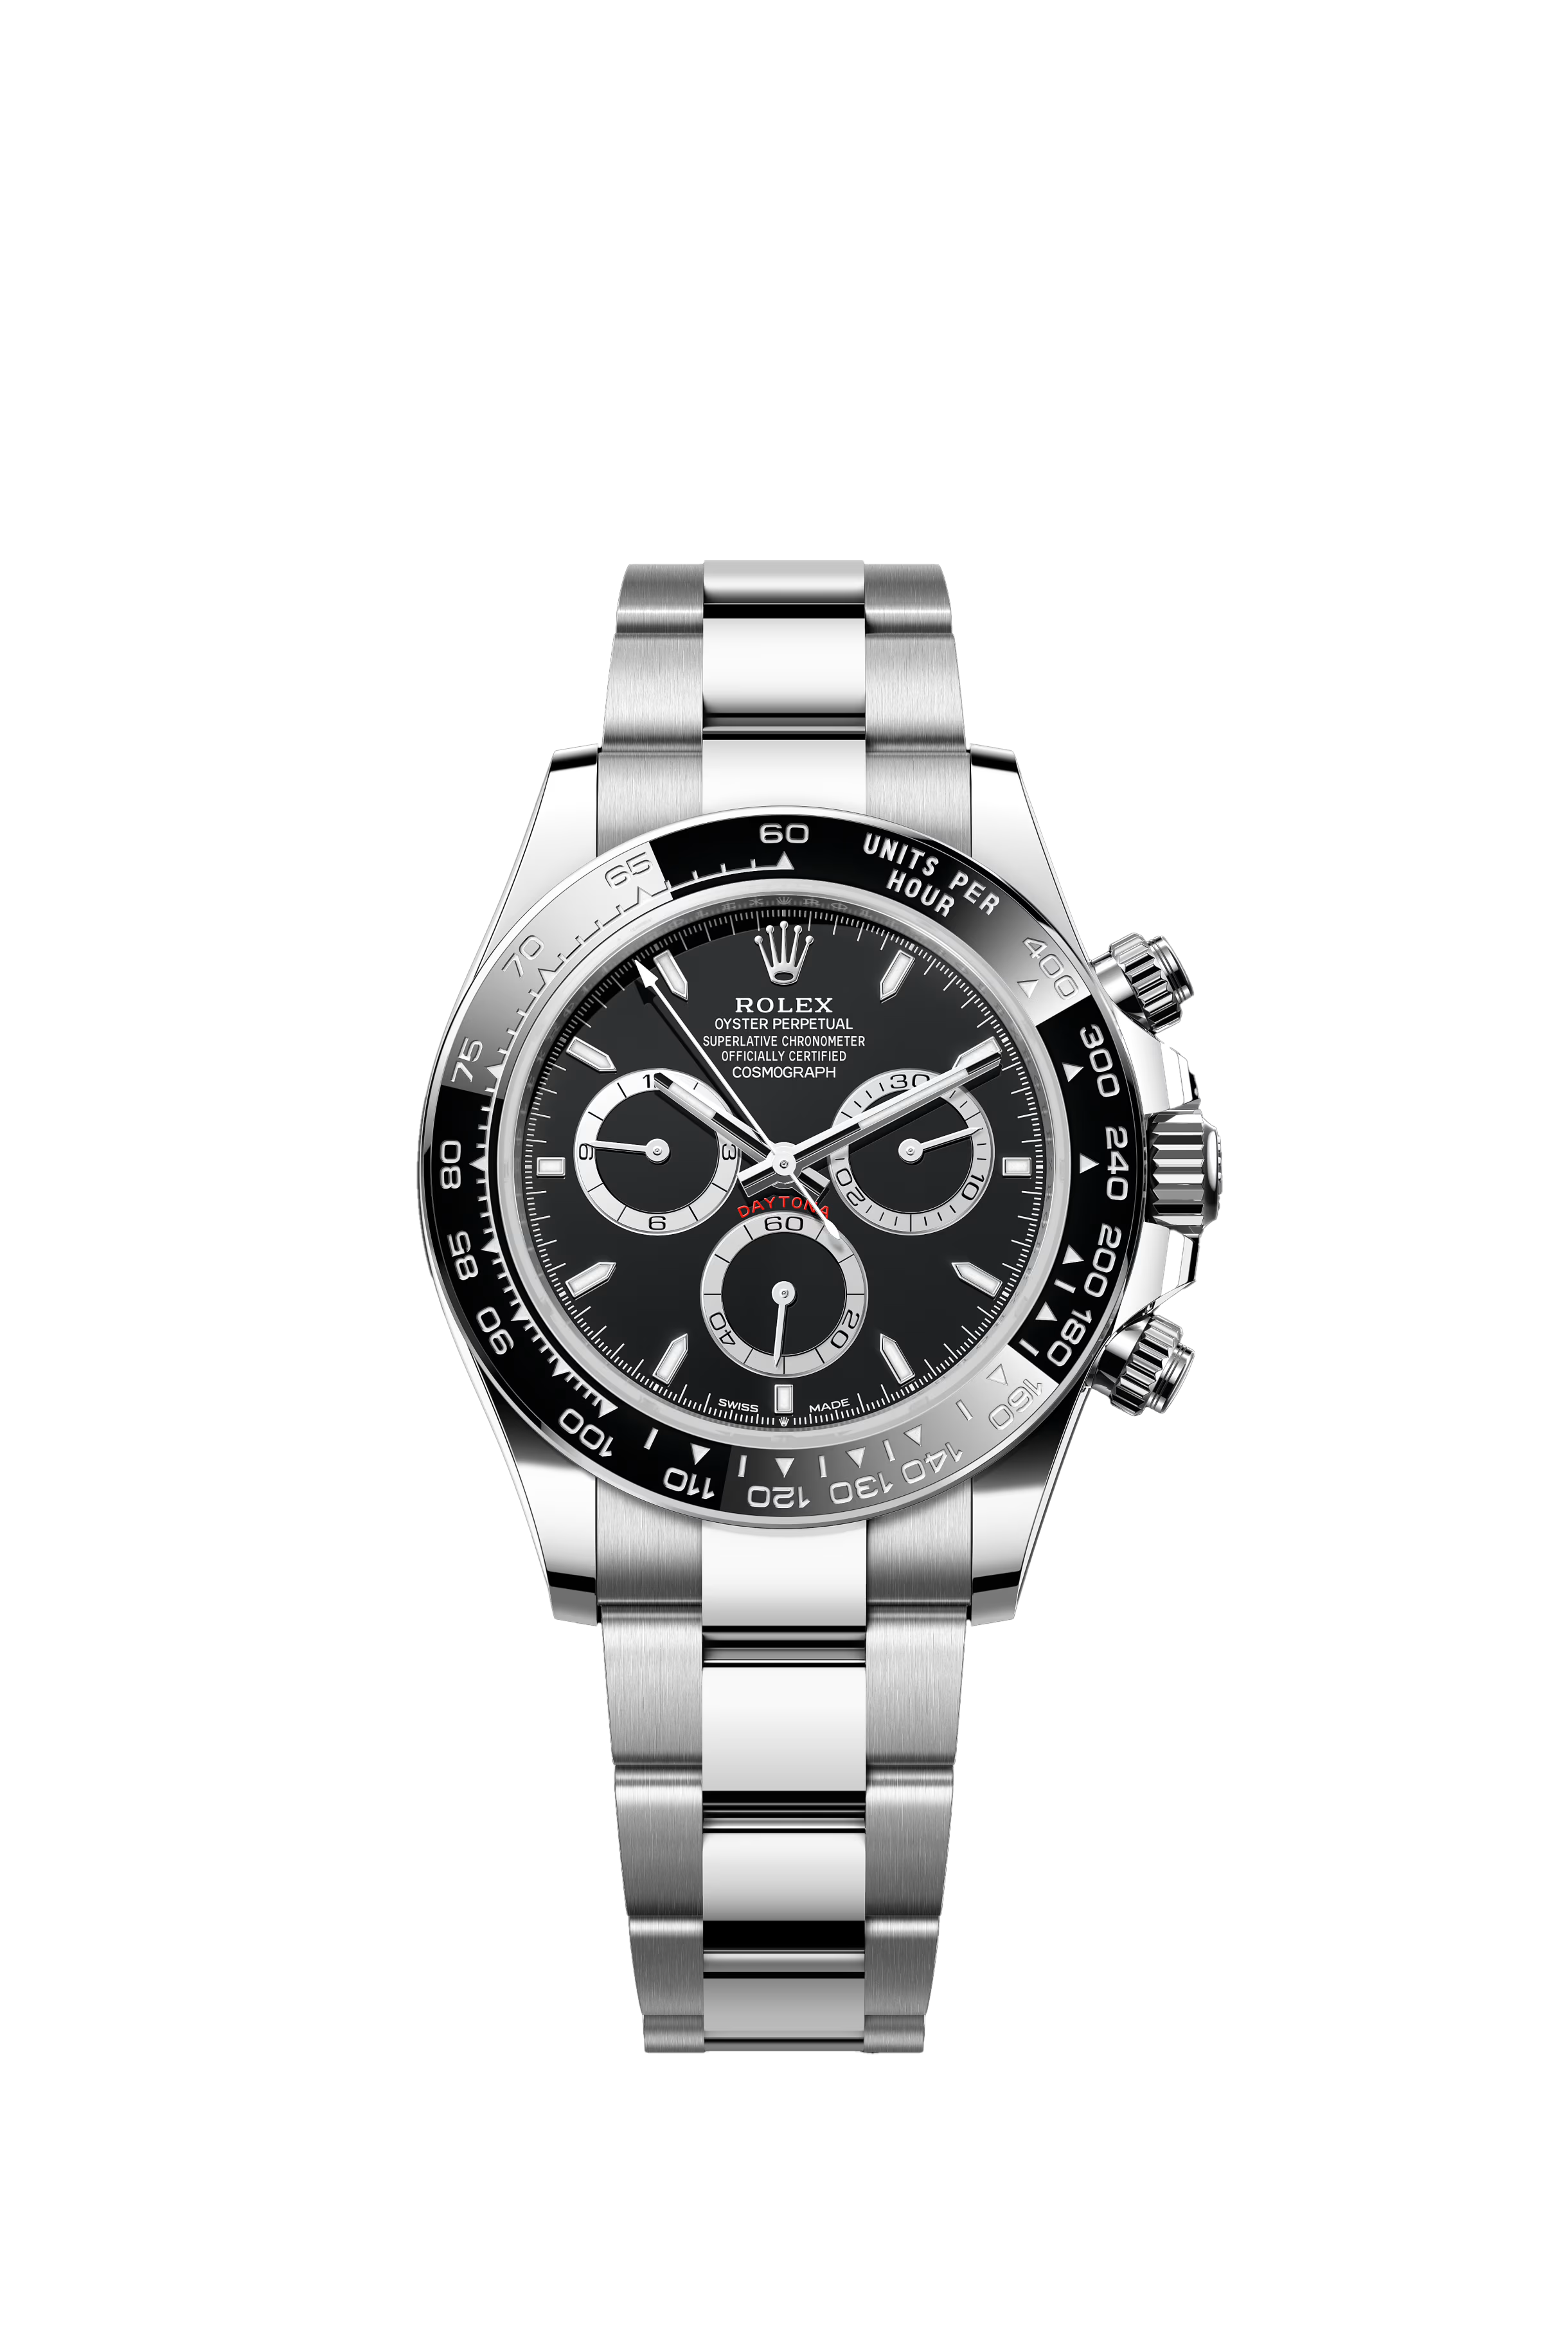 Rolex Cosmograph Daytona Oyster, 40 mm, Oystersteel Reference 126500LN